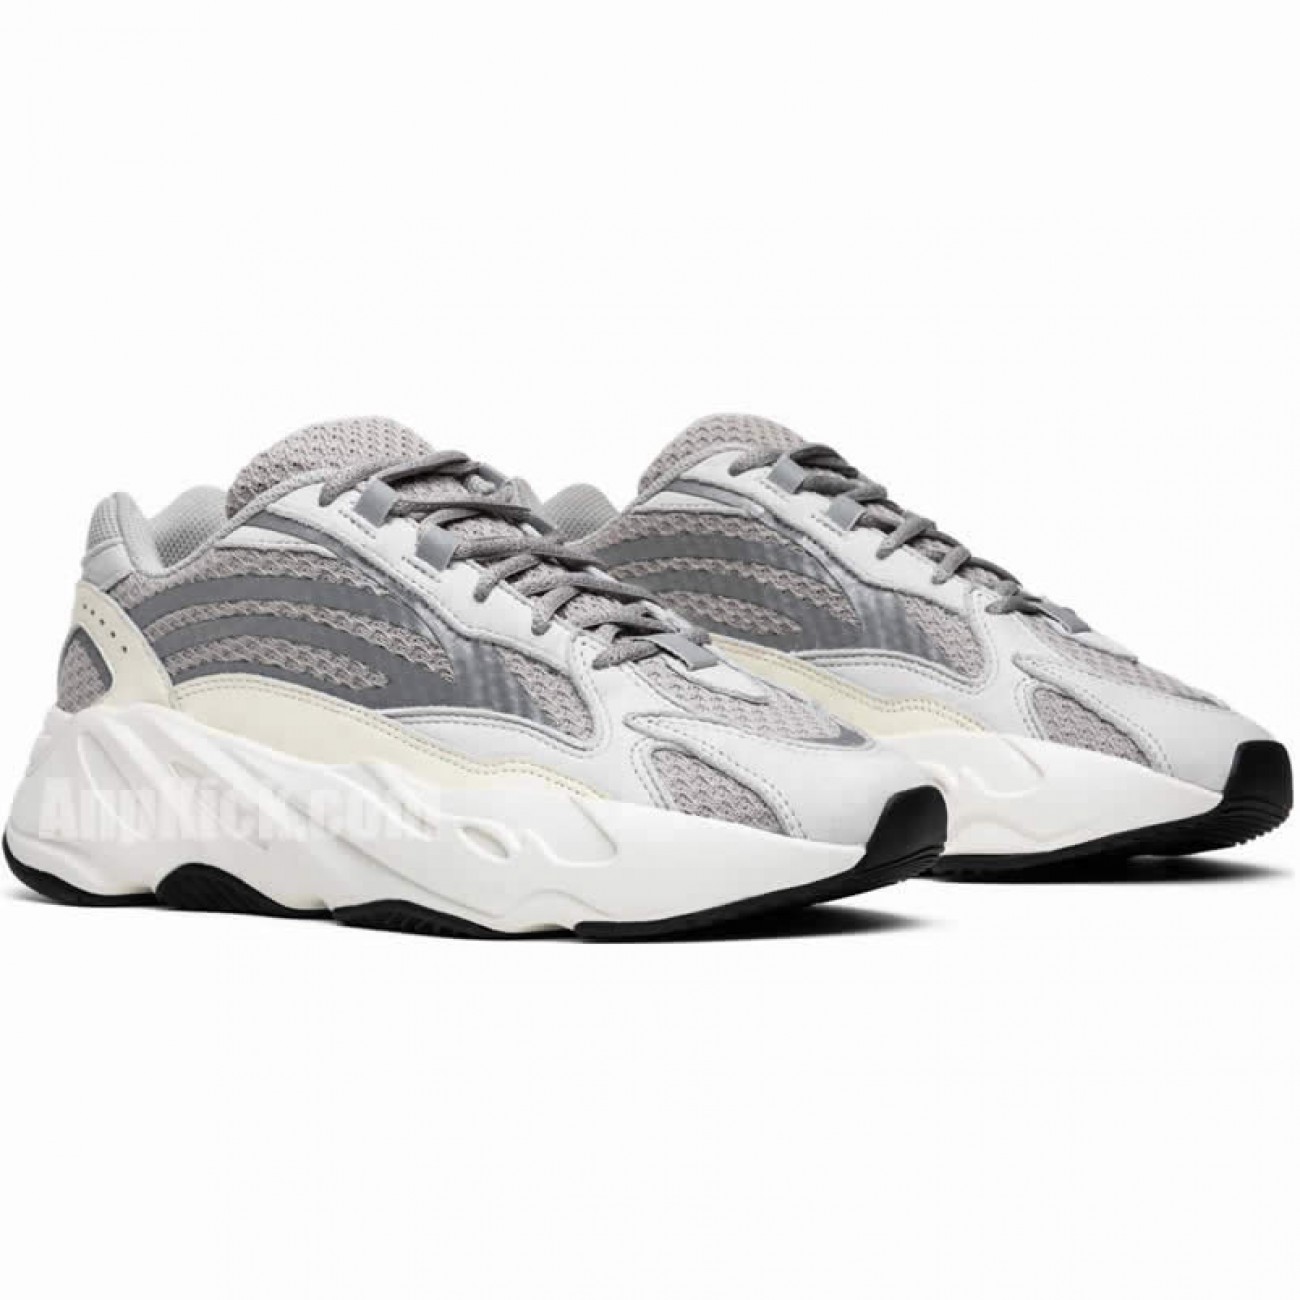 Yeezy Boost 700 V2 "Static" Shoes Supply Release Date EF2829